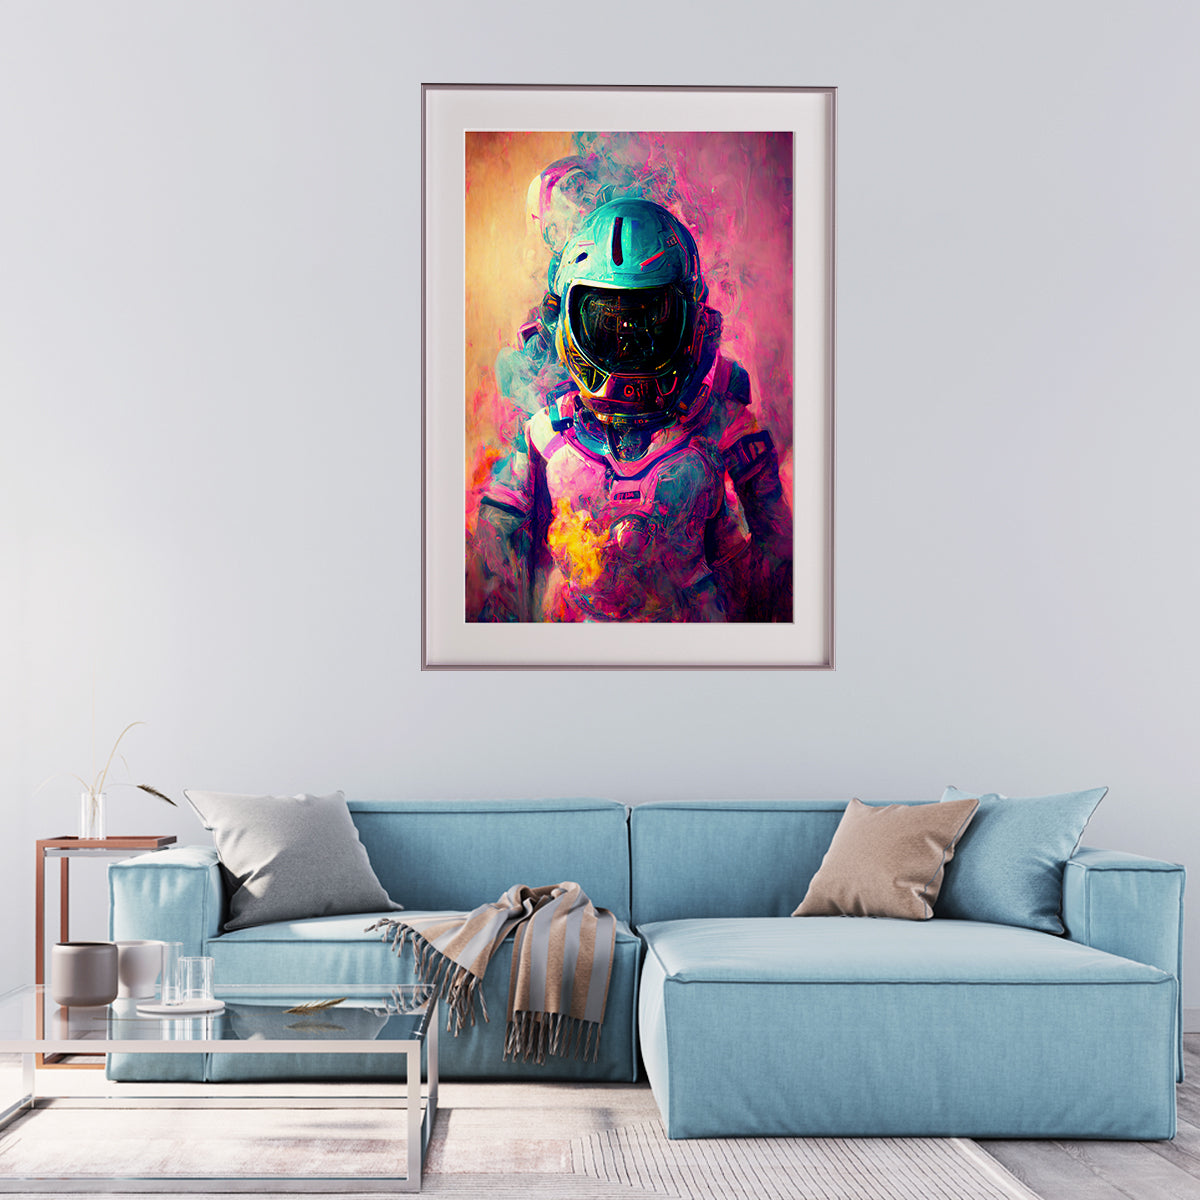 Neon Astronaut in Colorful Smoke Art Posters Prints Wall Decor-Vertical Posters NOT FRAMED-CetArt-8″x10″ inches-CetArt